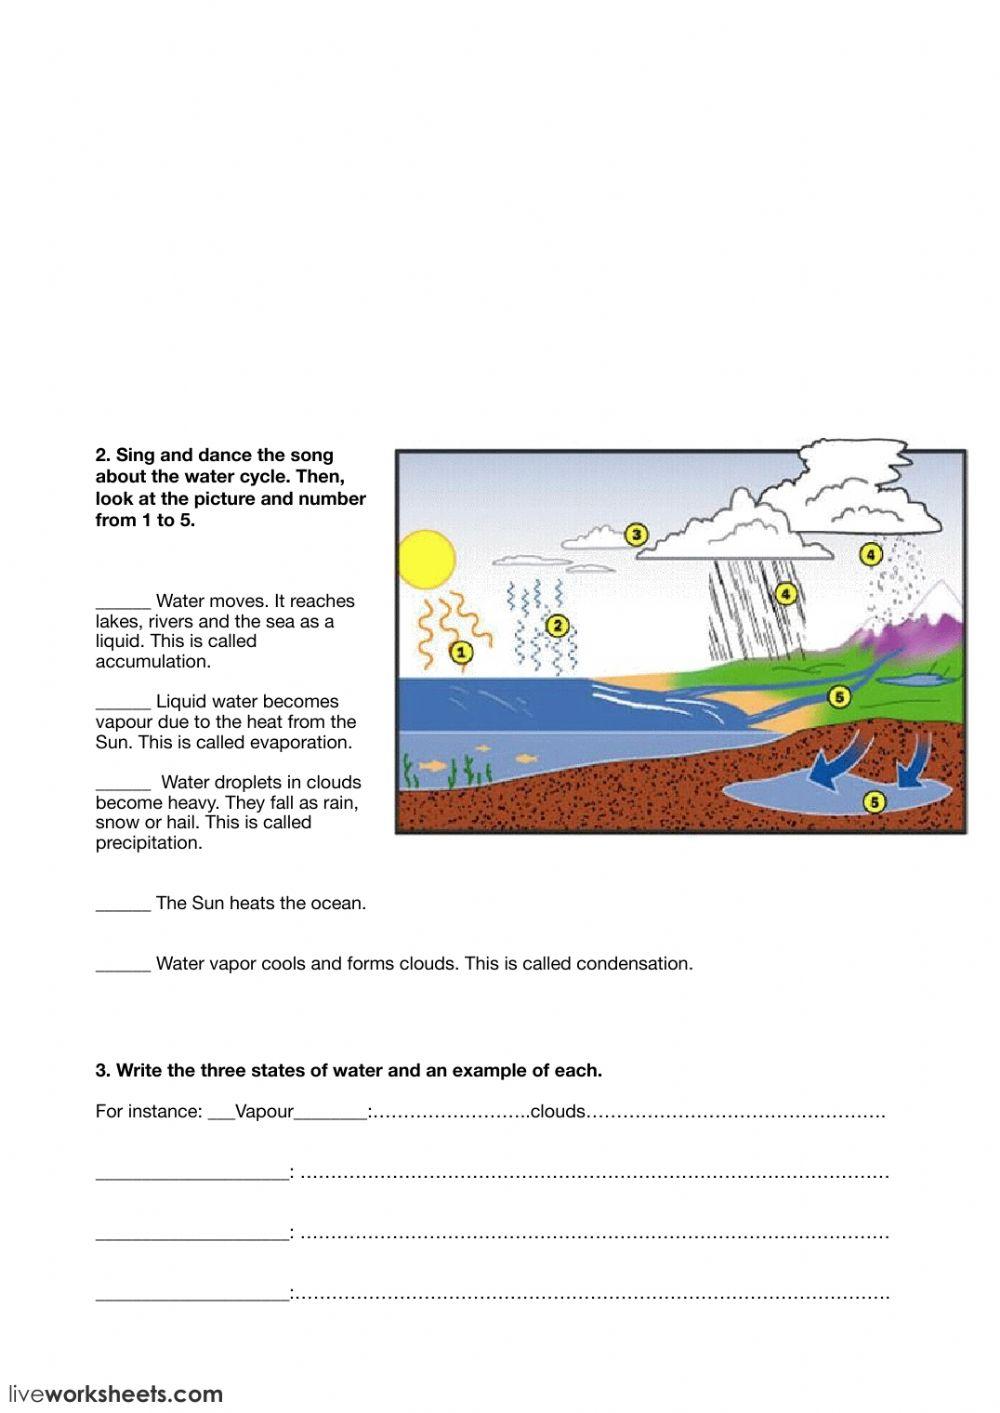 Water cycle and states of water